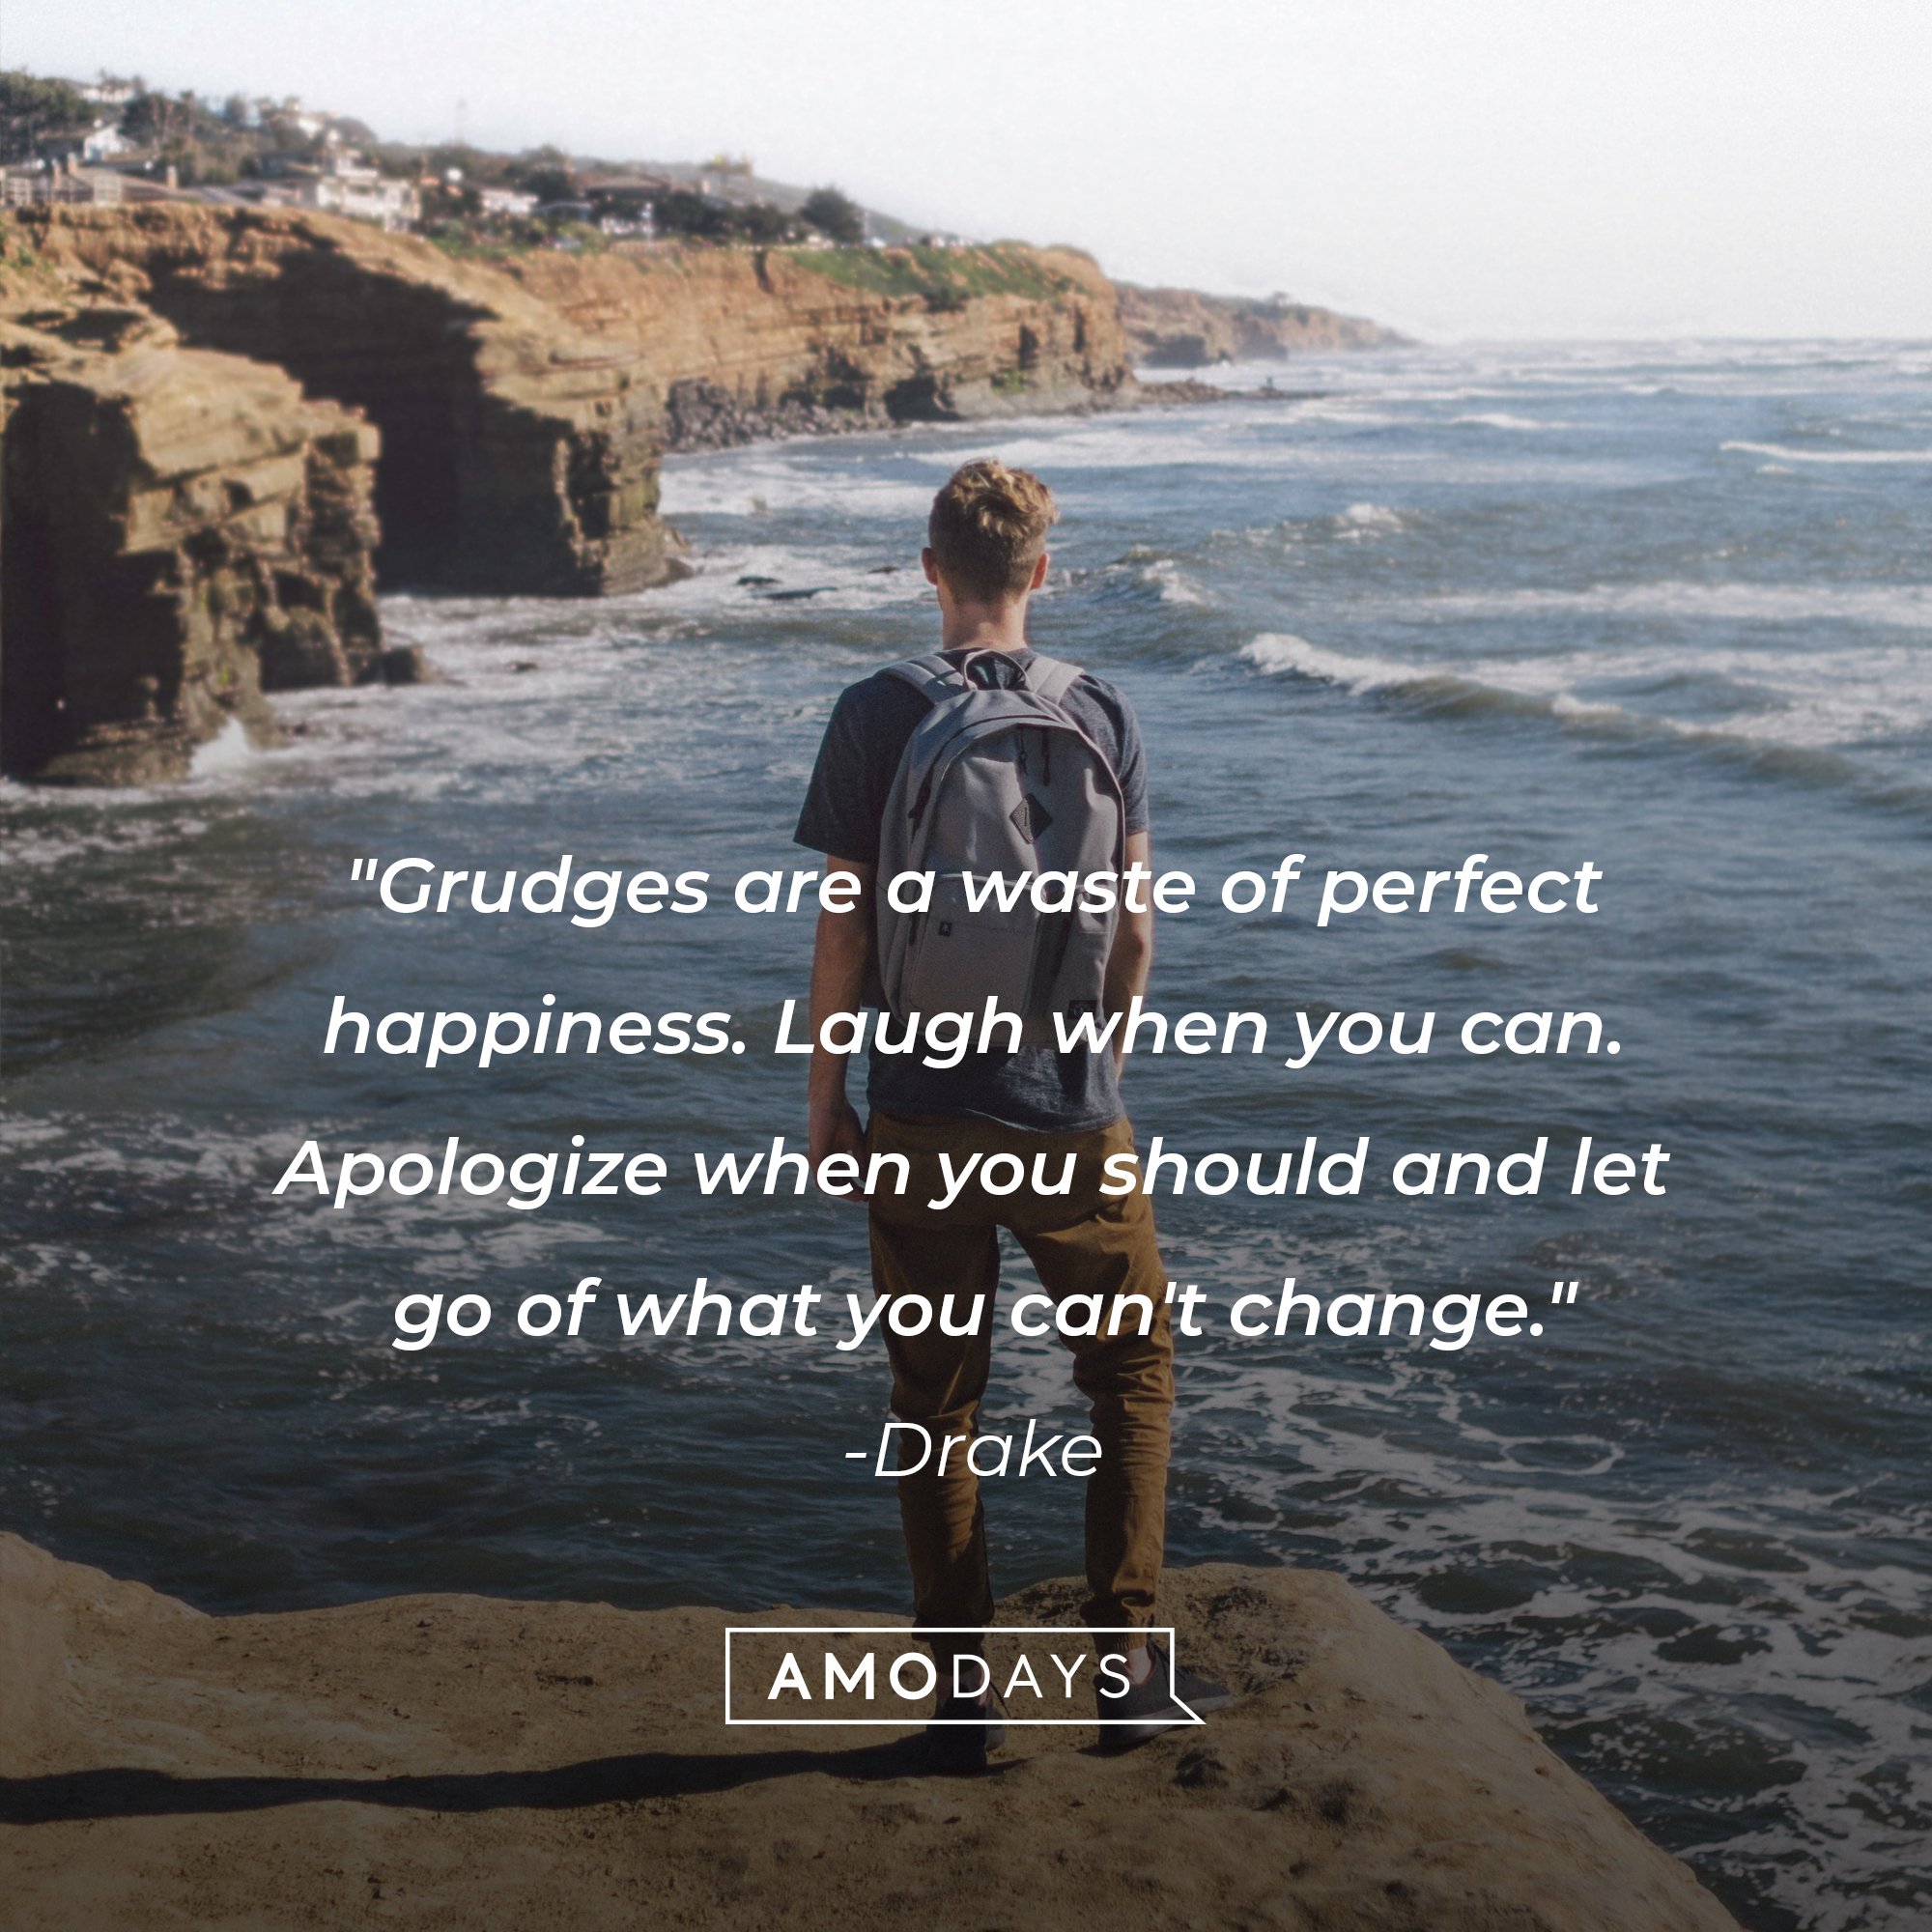  Drake’s quote: "Grudges are a waste of perfect happiness. Laugh when you can. Apologize when you should and let go of what you can't change." | Image: AmoDays     